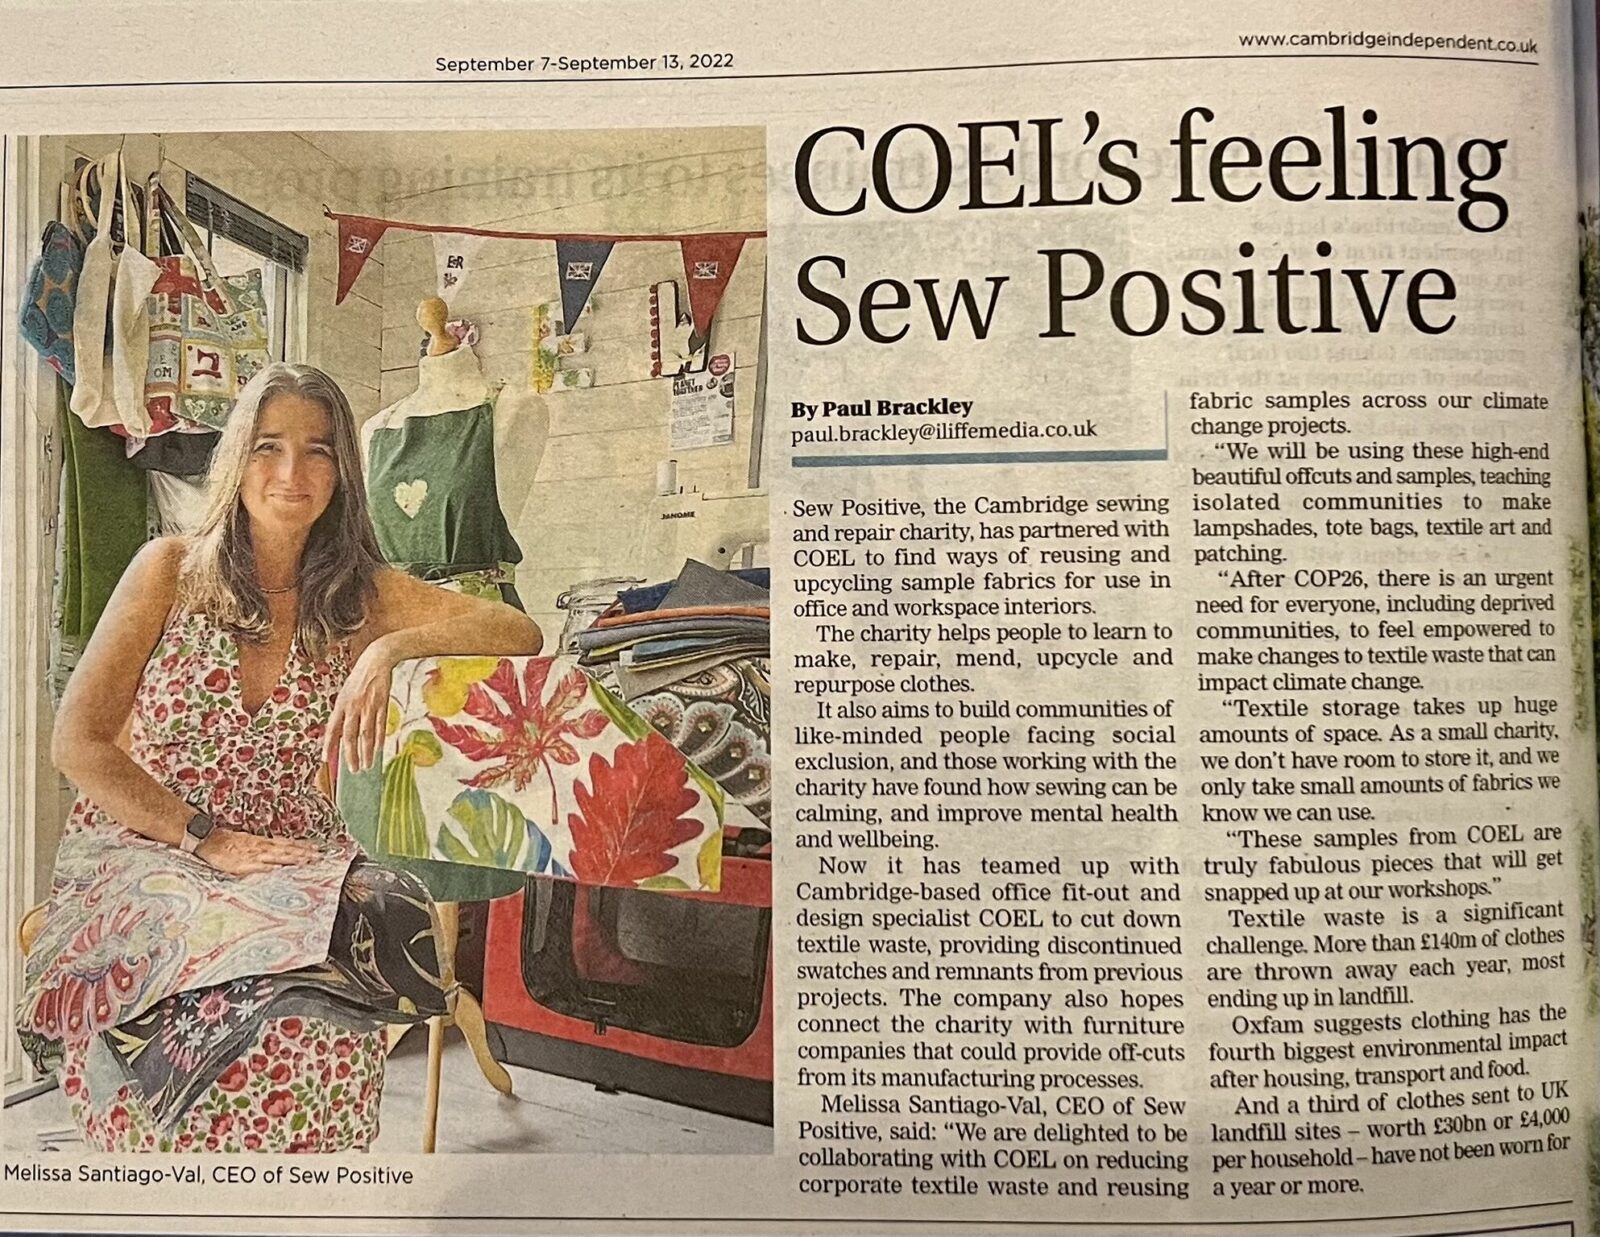 COEL teams up with Sew Positive to upcycle textile waste